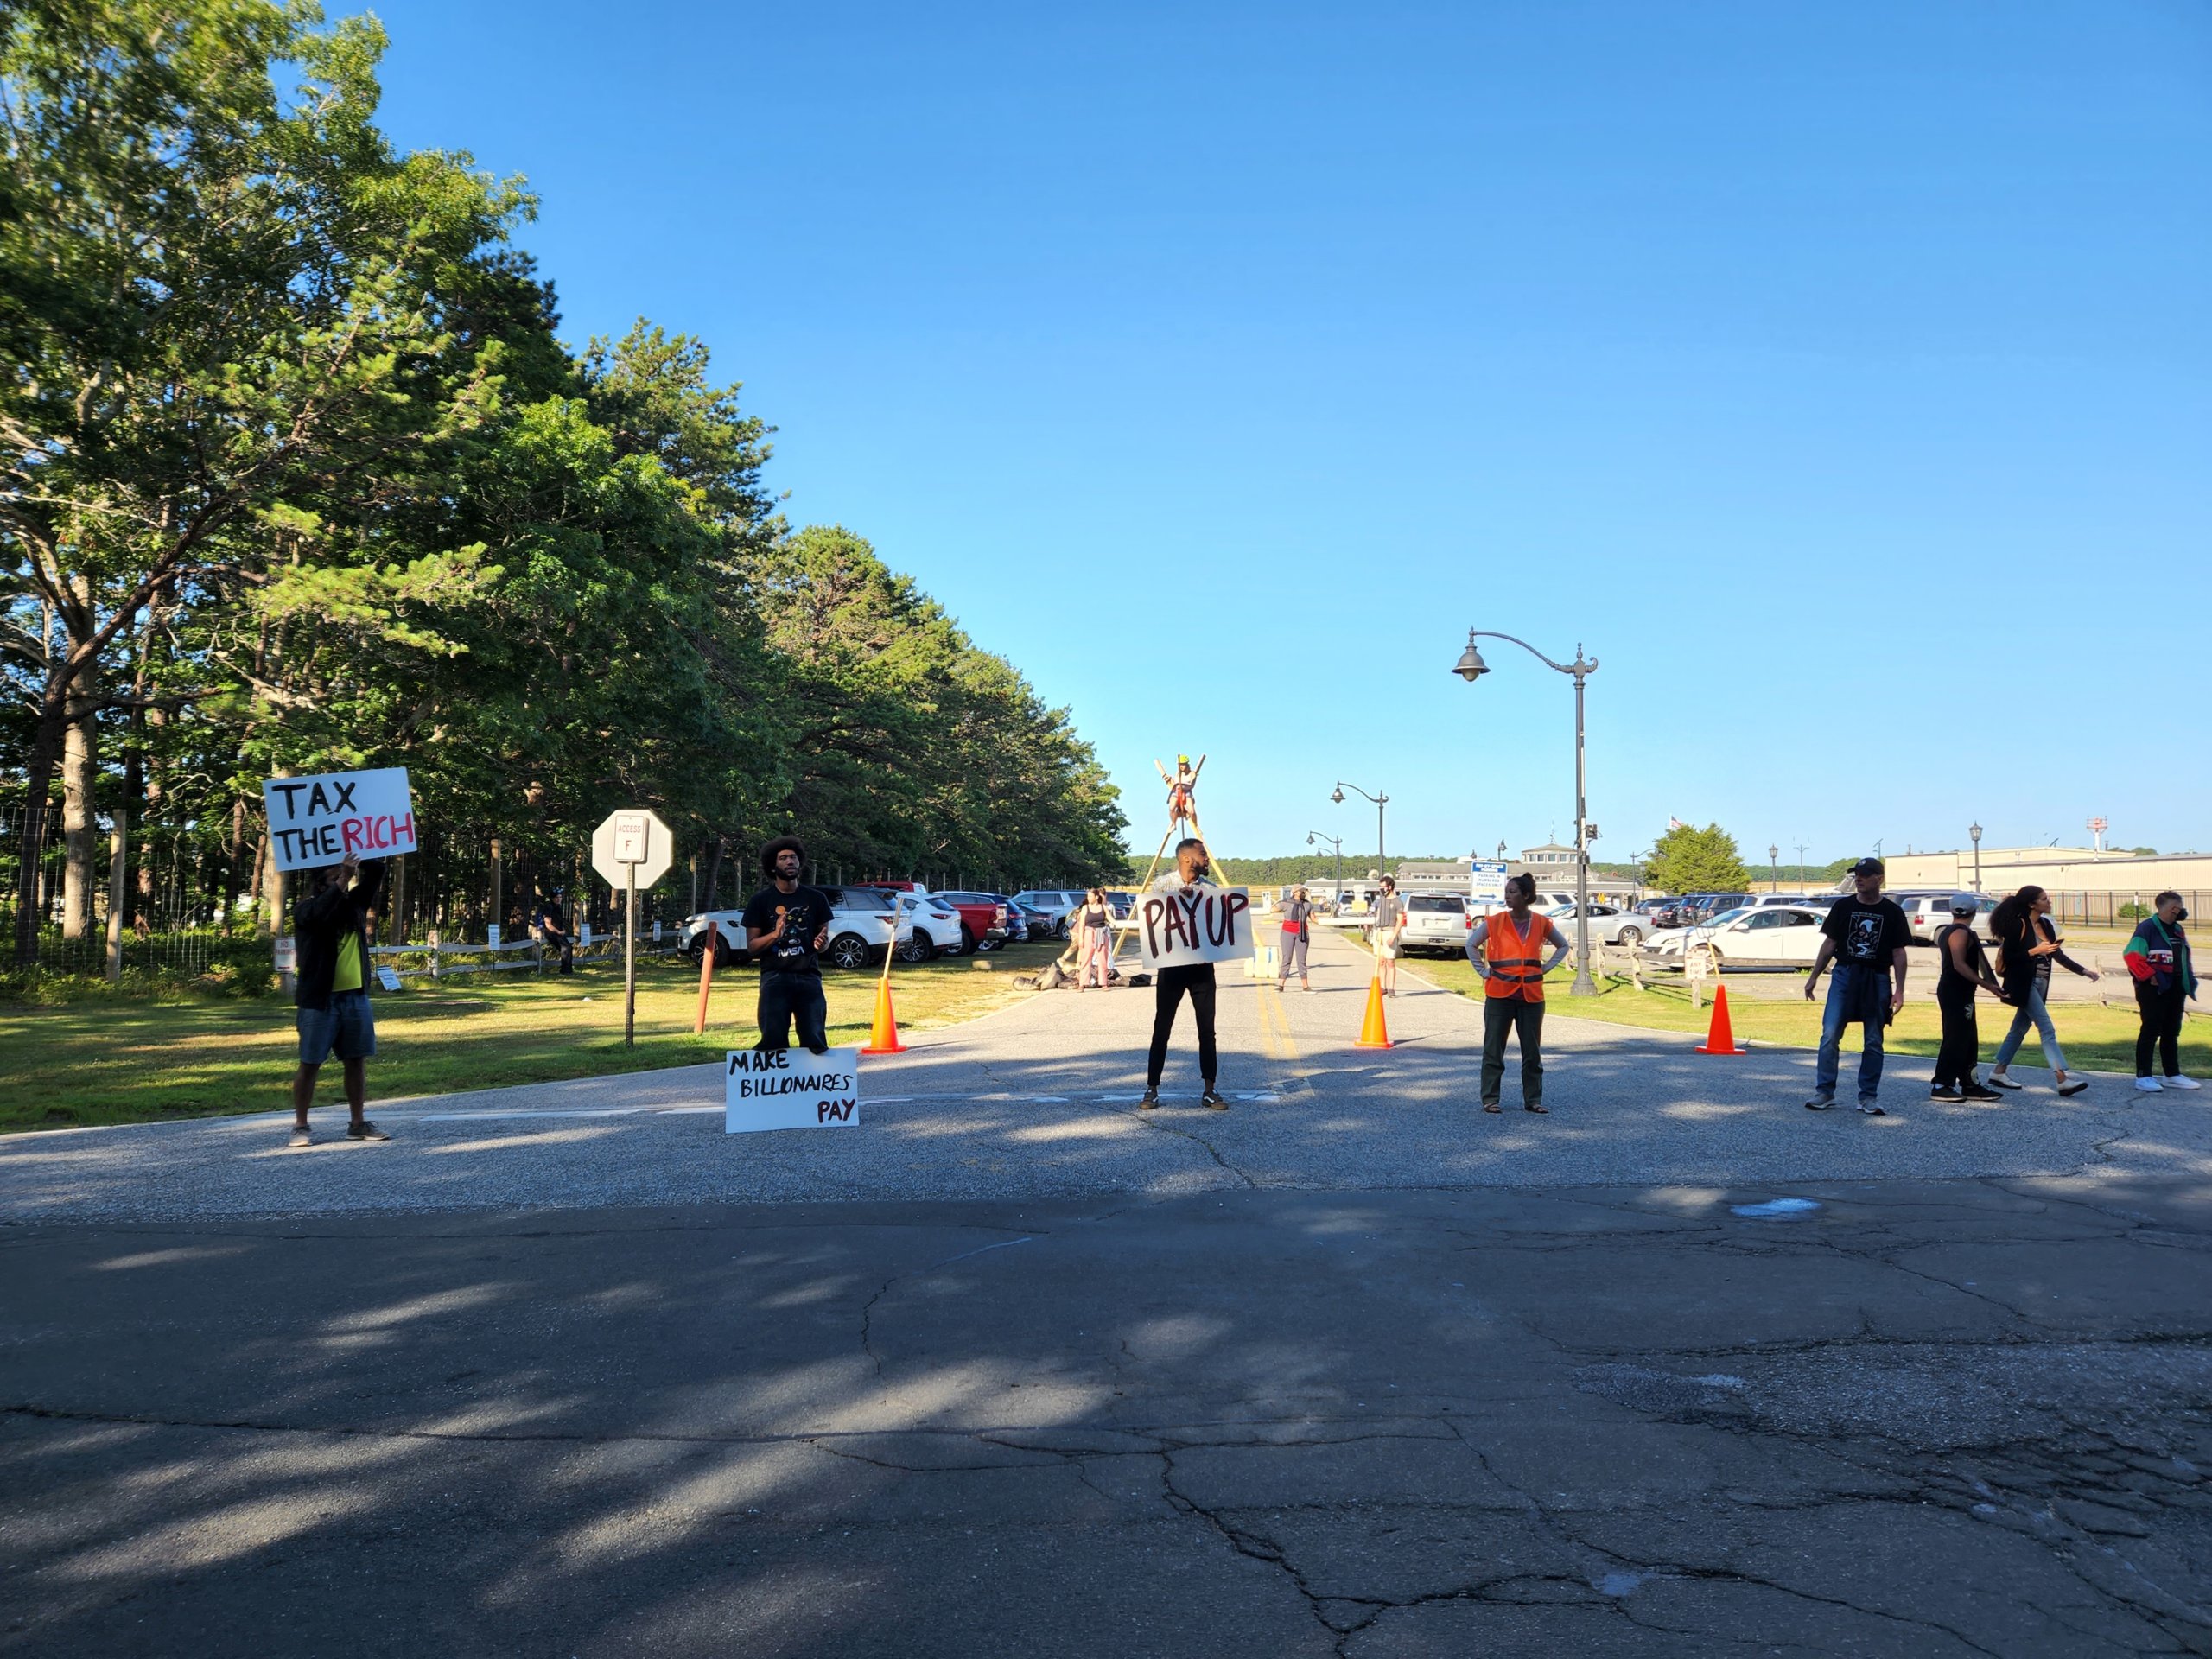 Protesters blocked the entrance to East Hampton Airport on July 11, 2022